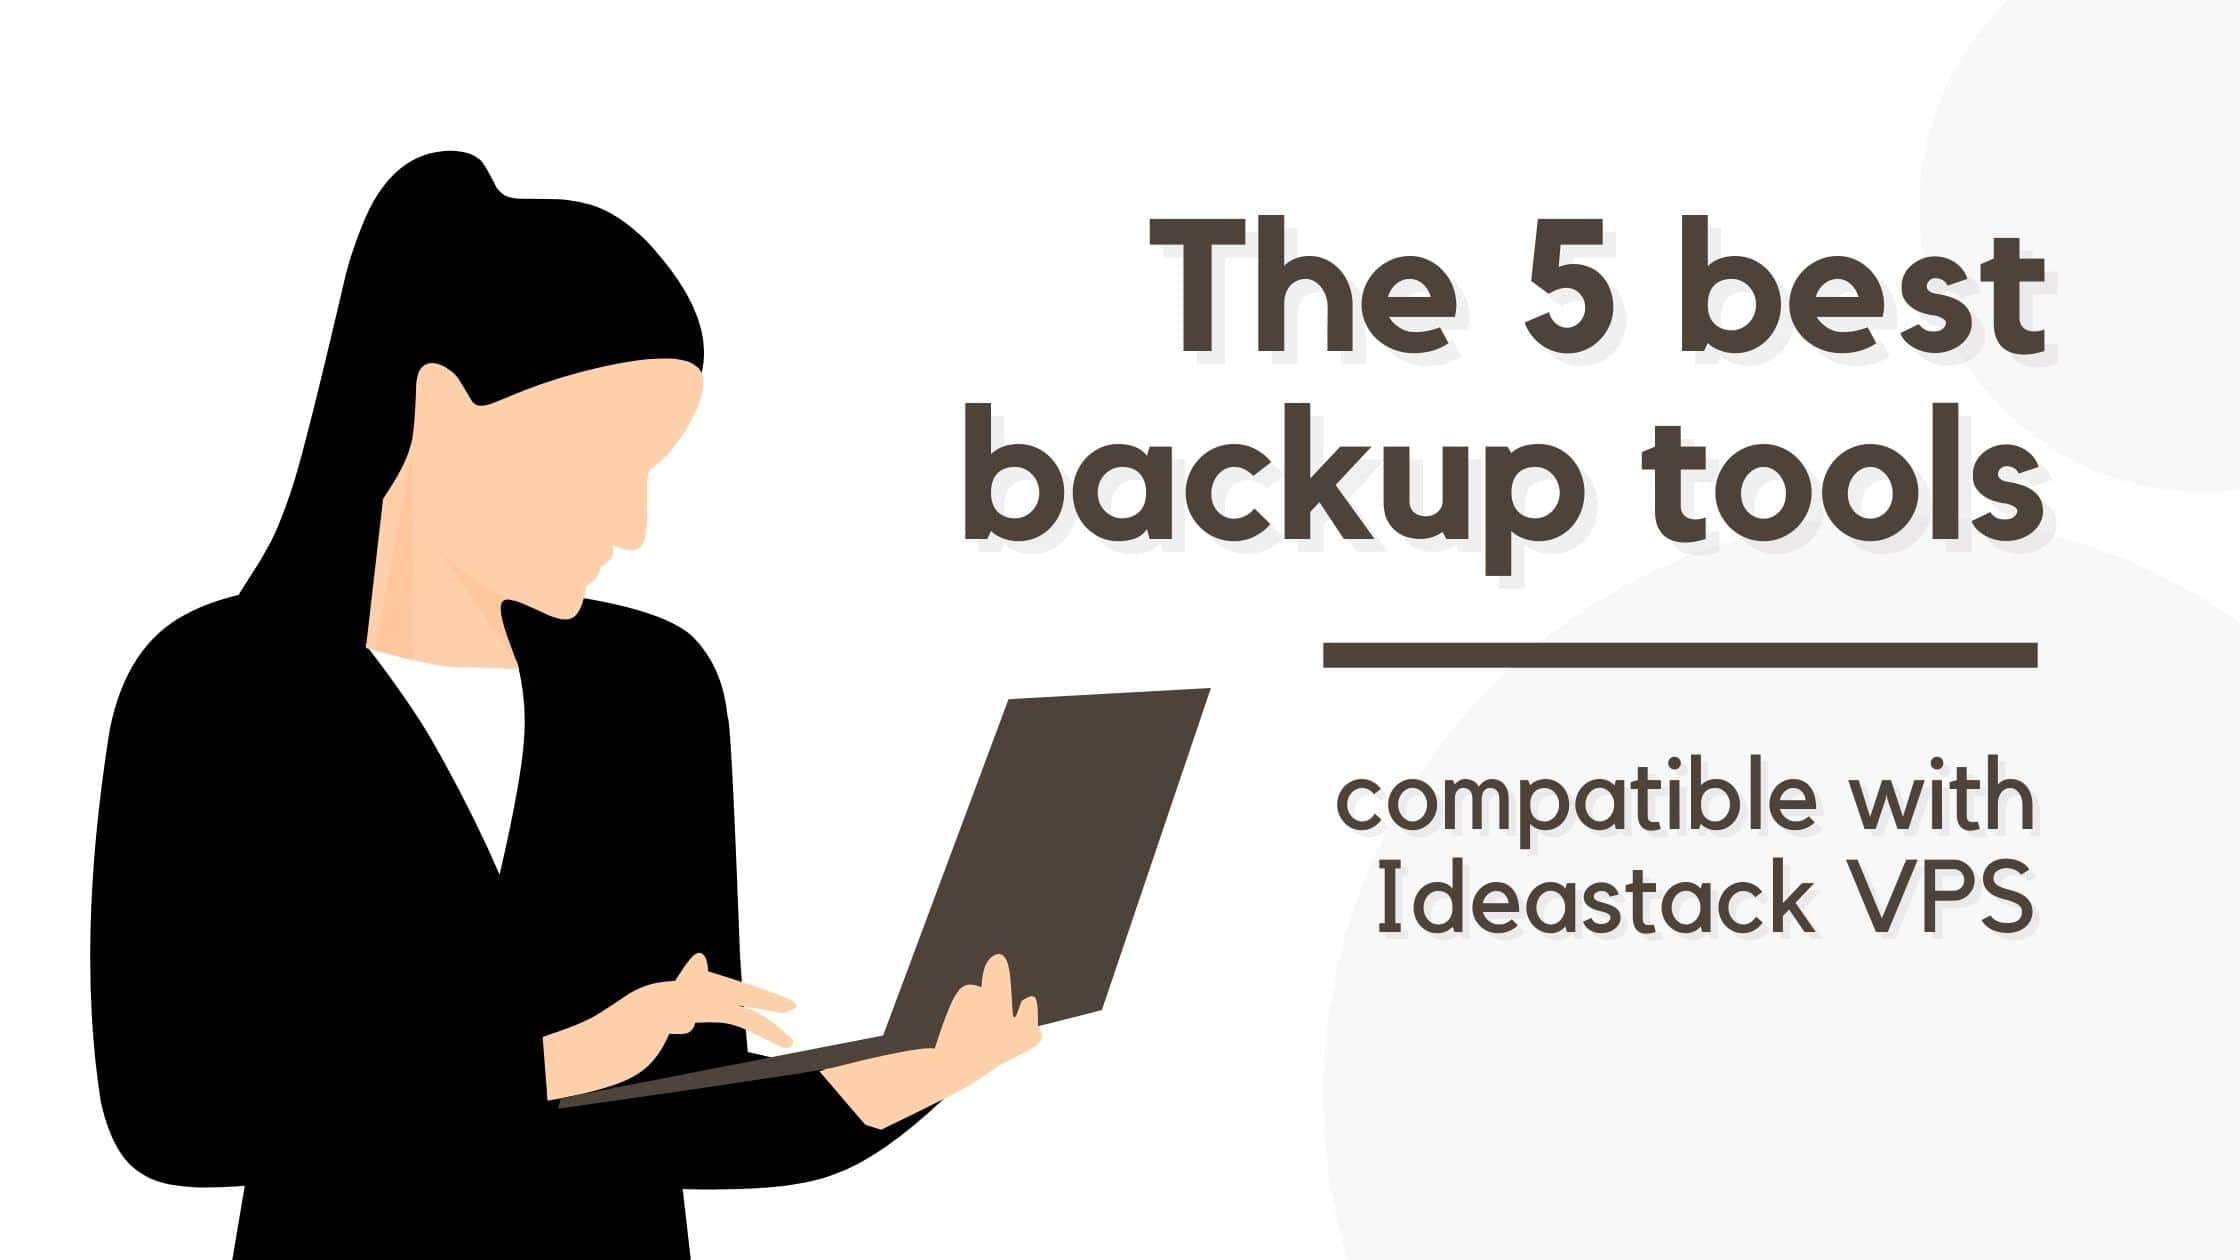 The 5 best backup tools compatible with Ideastack VPS